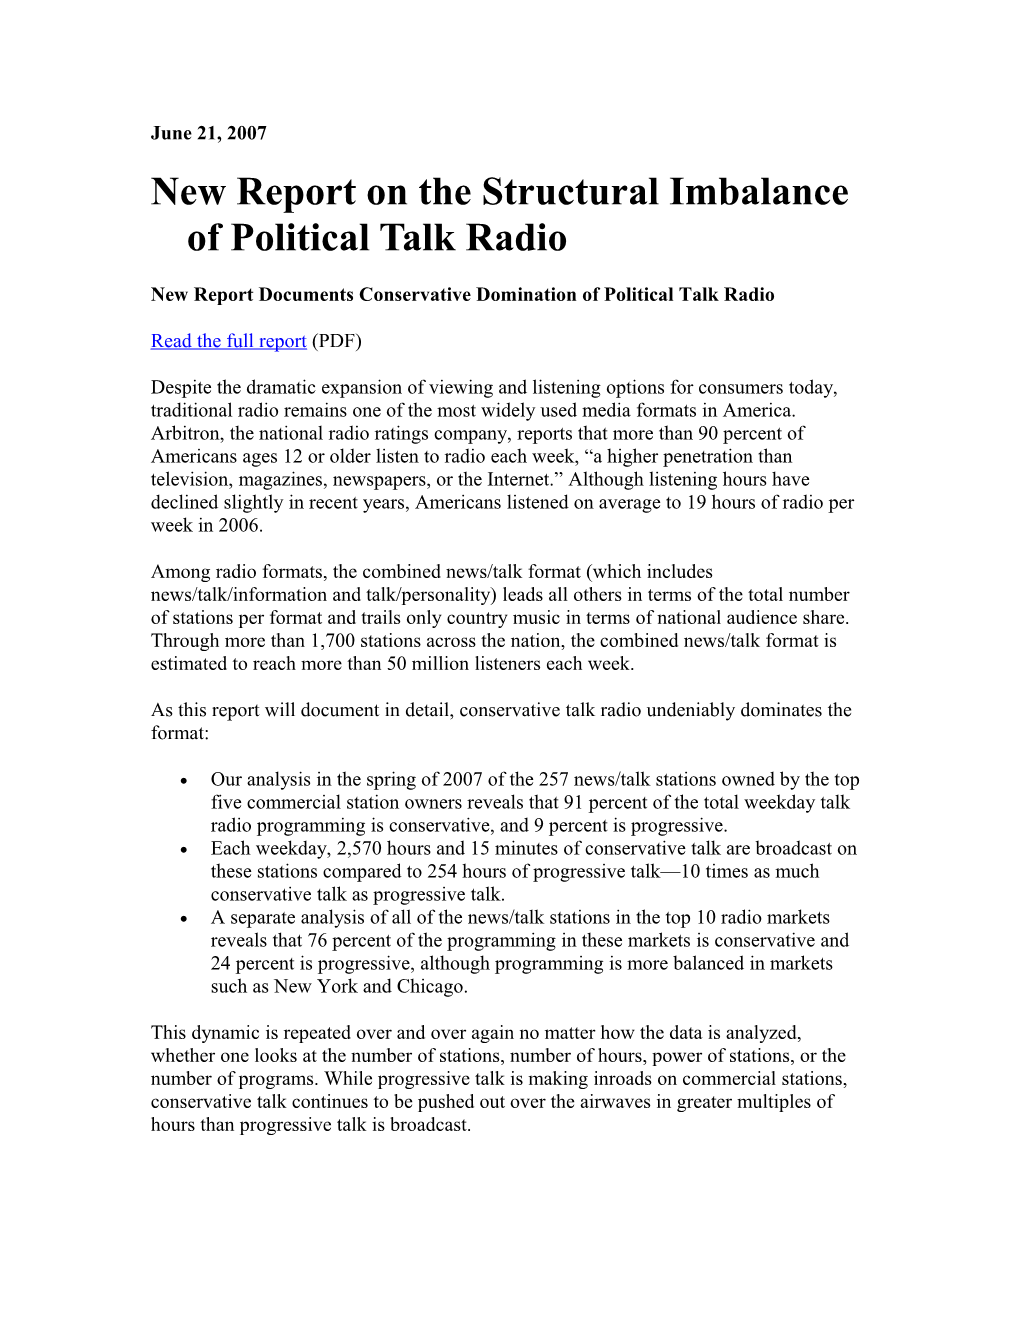 New Report on the Structural Imbalance of Political Talk Radio